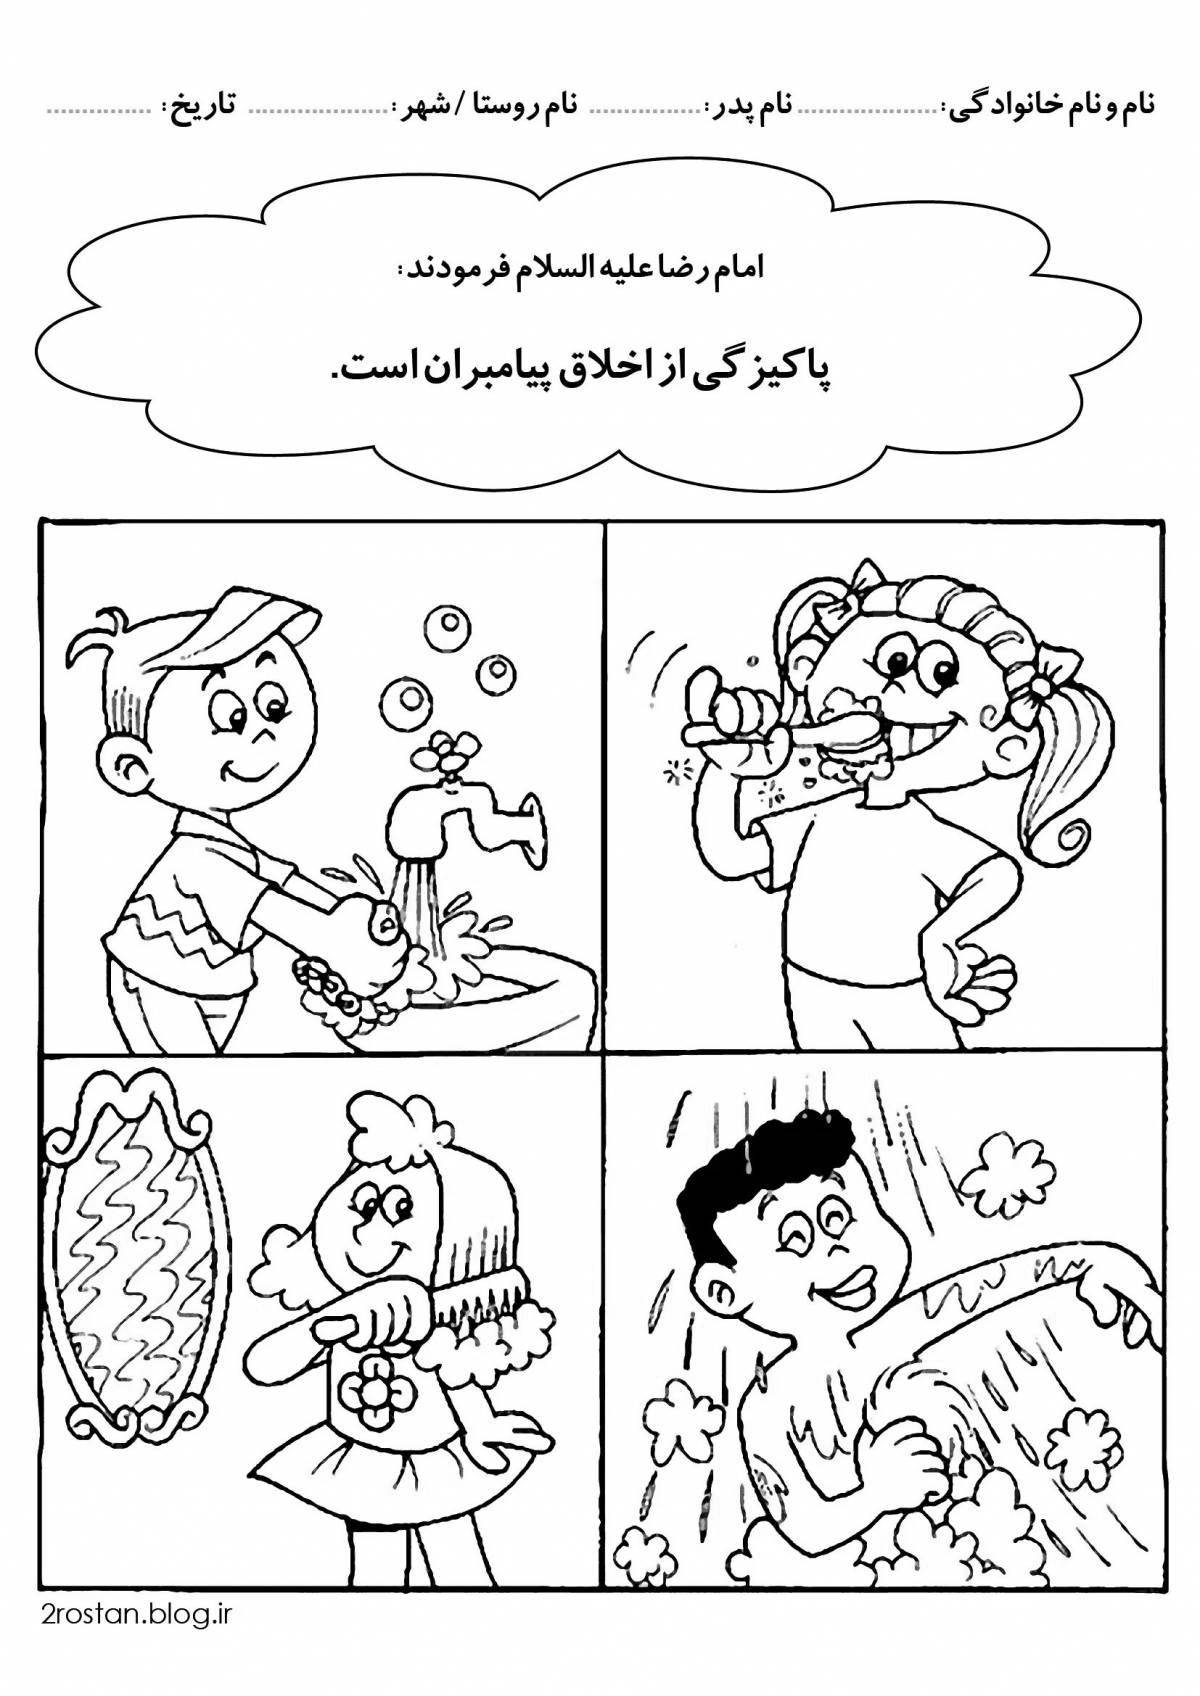 A fun personal care coloring book for kids